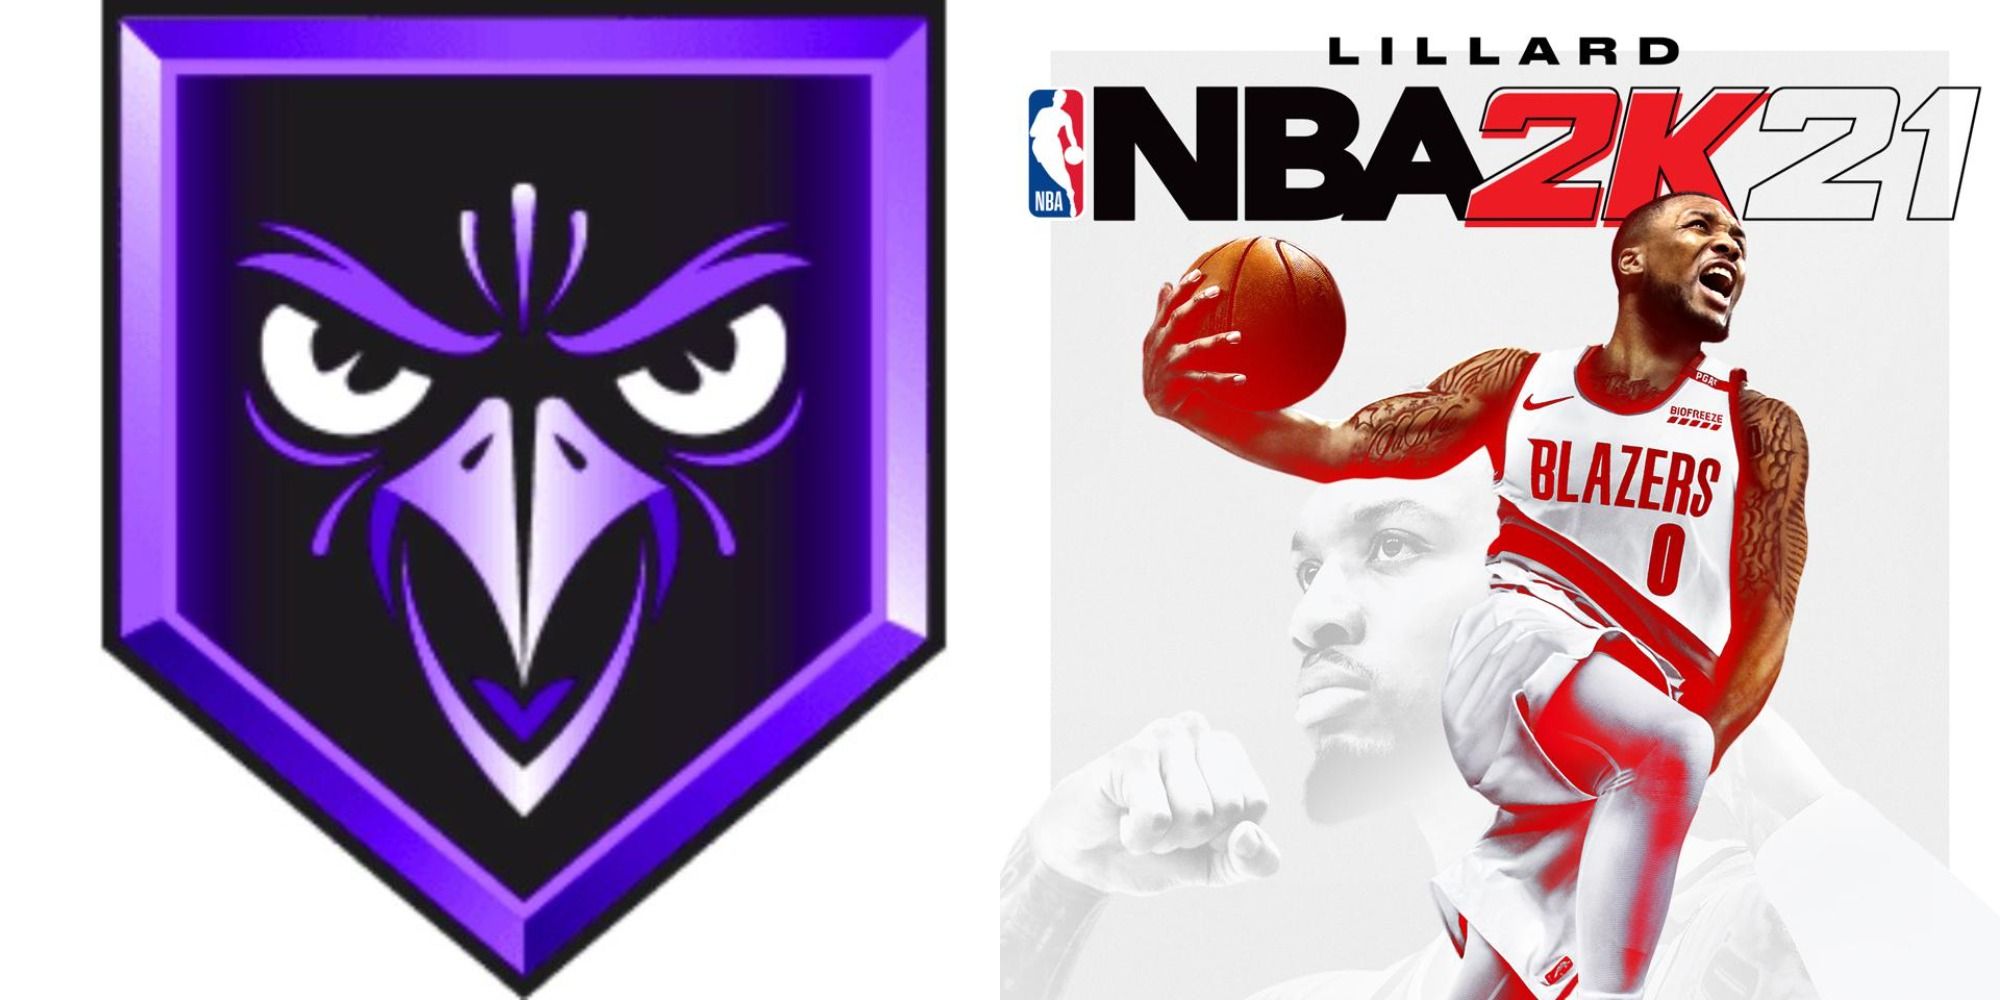 An image of the interceptor badge and the NBA 2K21 front cover